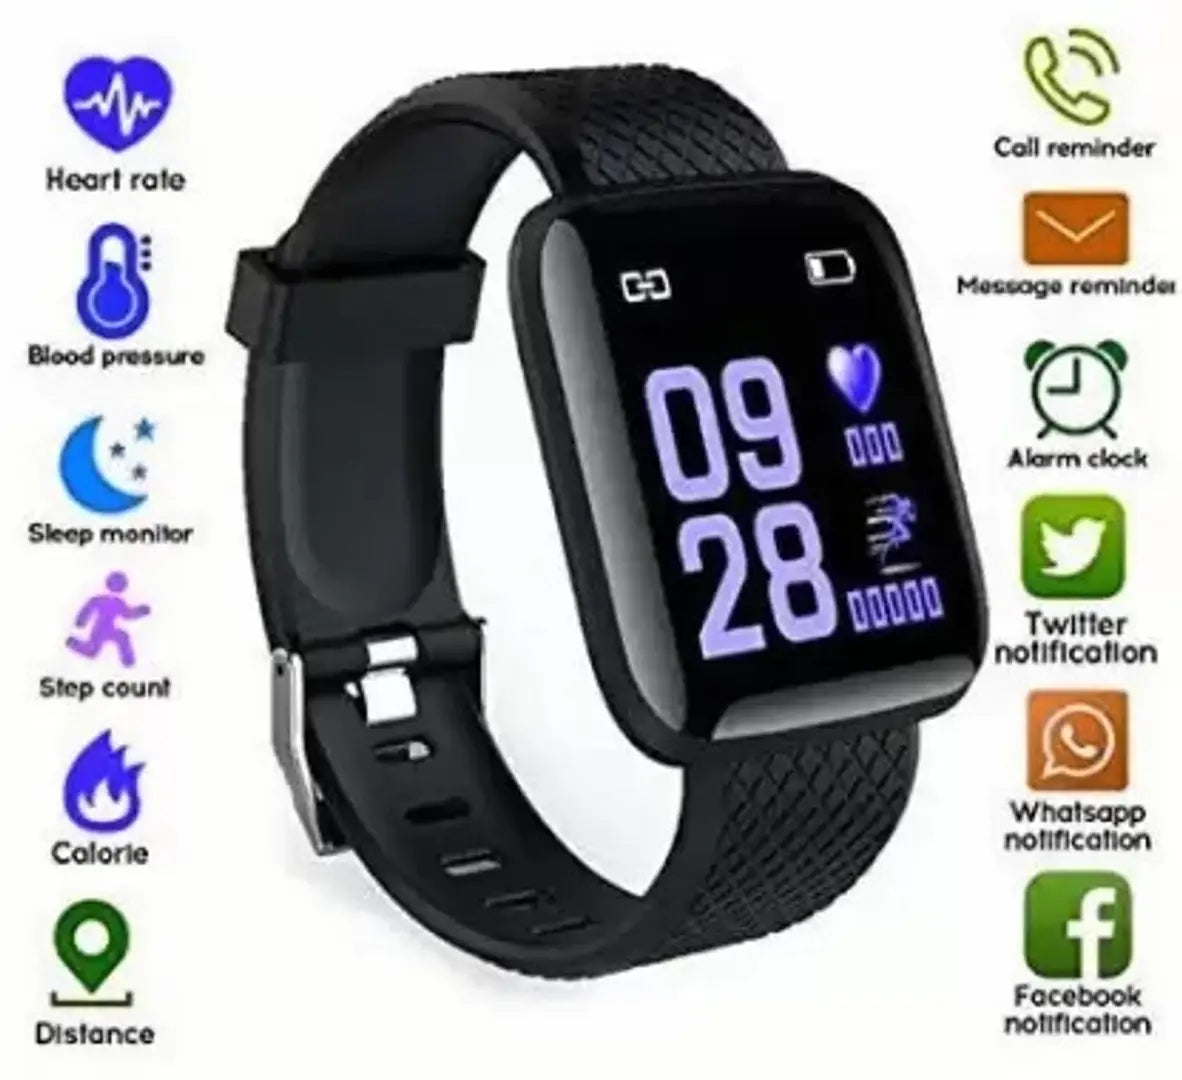 Smart Watch for Men ID116 Plus Waterproof Bluetooth Smartwatch Fitness Band with Heart Rate Sensor Activity Tracker BP Monitor Latest 1.3 LED Display Sports Smart Watch for Kids,Boys  Girls - Black